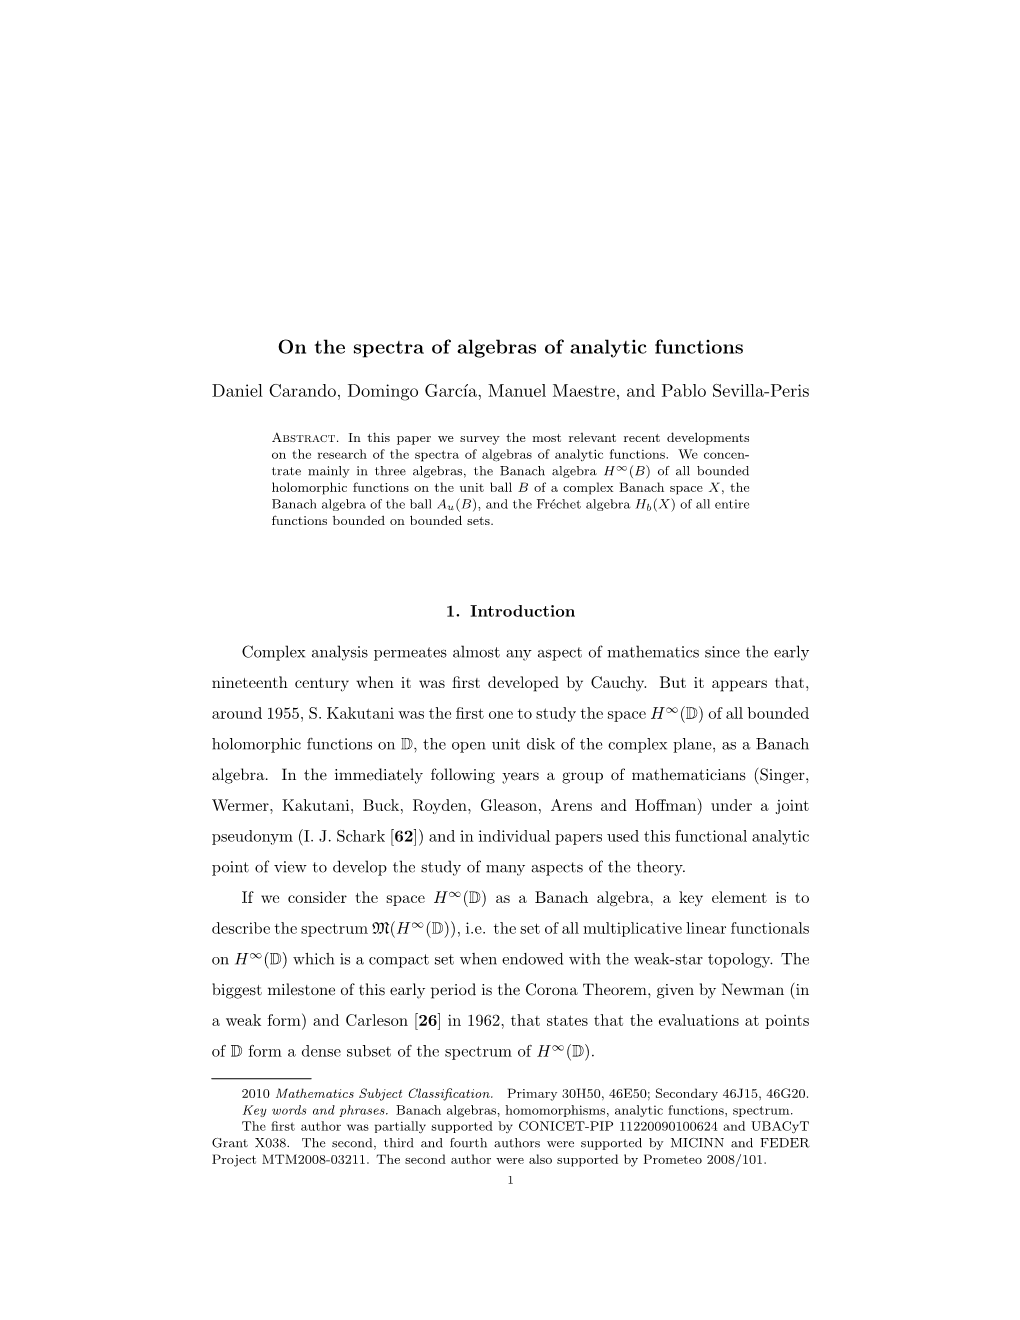 On the Spectra of Algebras of Analytic Functions